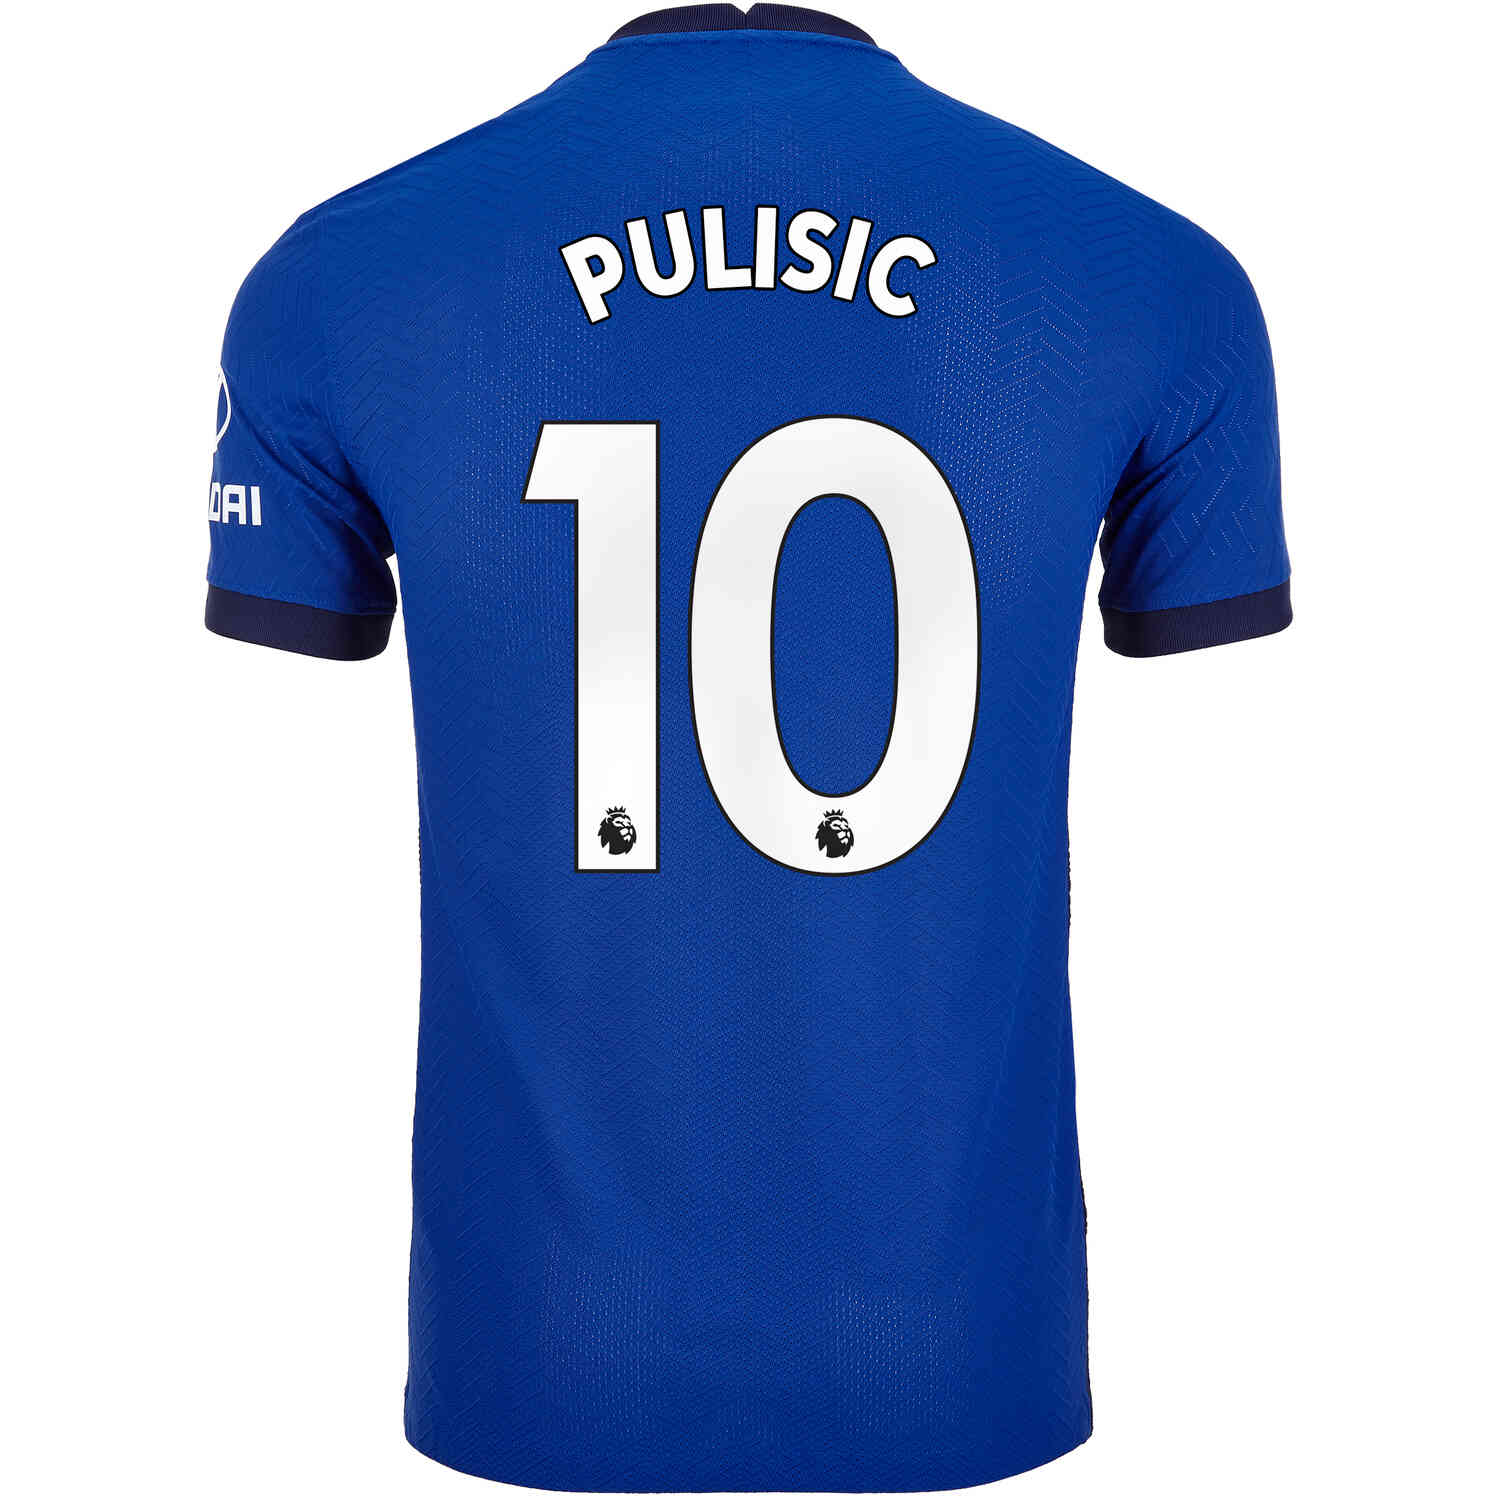 2020/21 Christian Pulisic Chelsea Home Match Jersey - Soccer Master